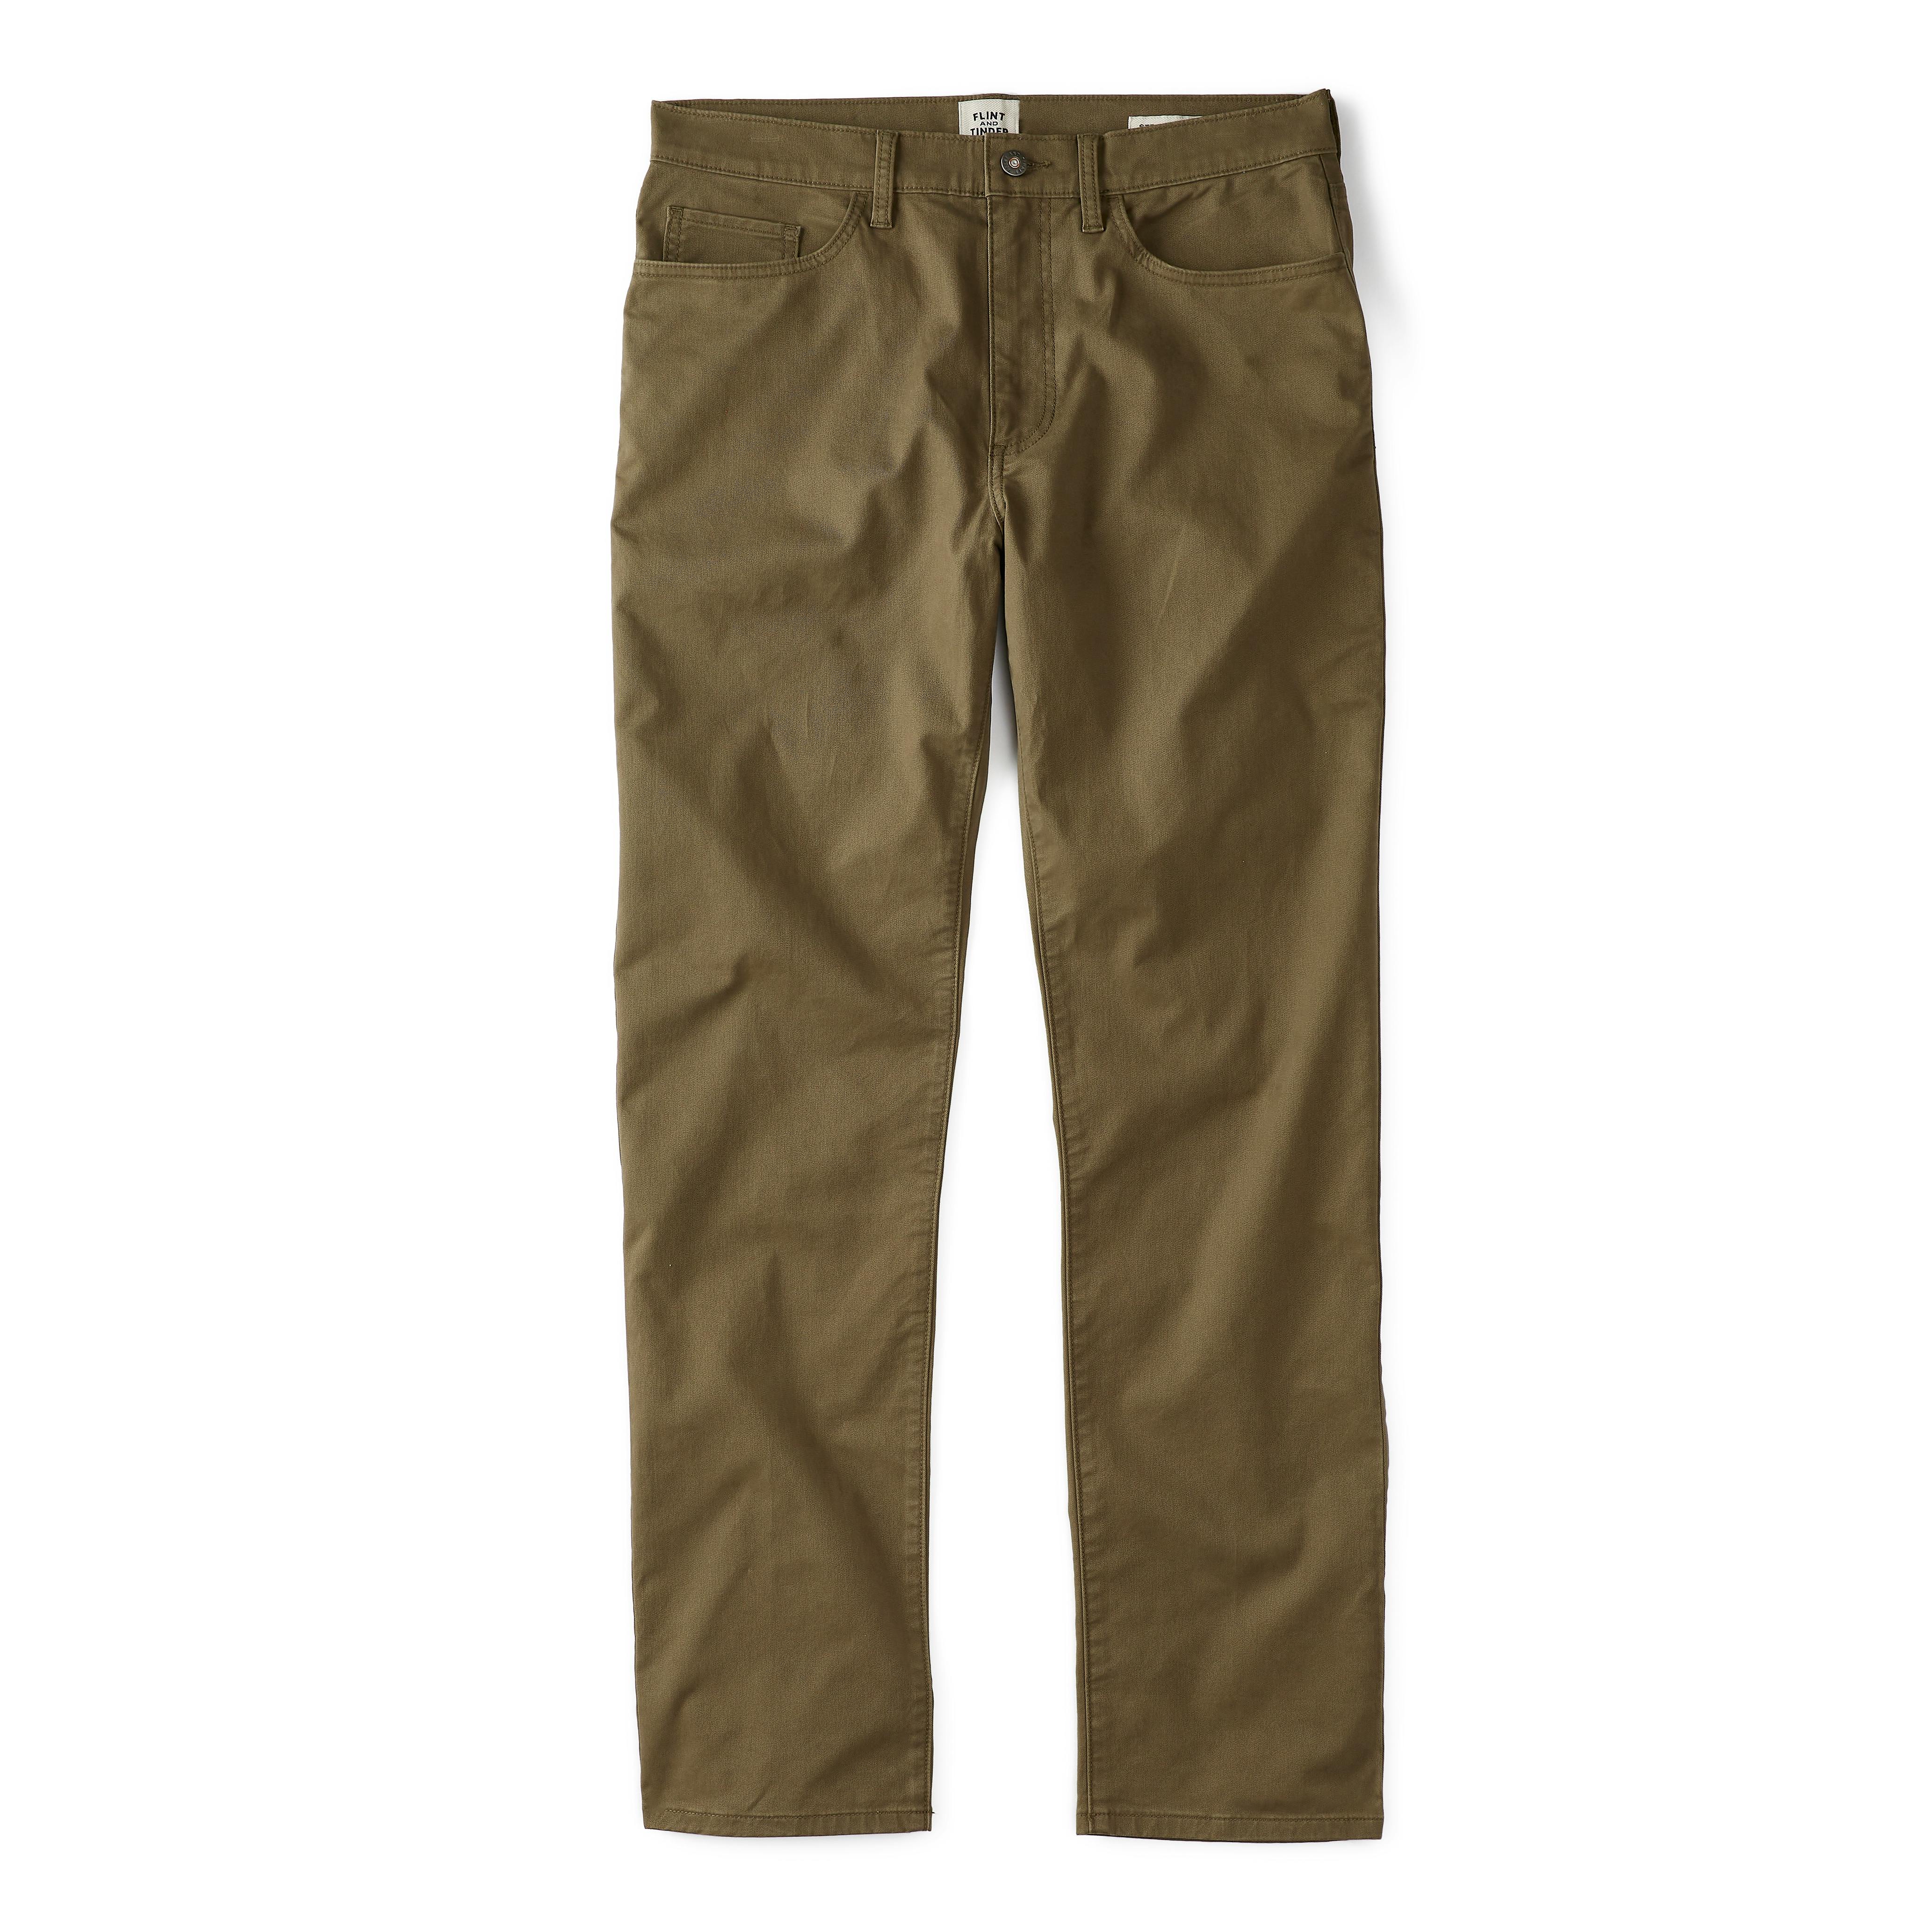 https://huckberry.imgix.net/spree/products/730514/original/84411_Flint_and_Tinder_365_Pant_-_Athletic_Tapered_Military_Olive_01.jpg?auto=format%2C%20compress&crop=top&fit=fill&cs=tinysrgb&ar=4%3A5&fill=solid&fill-color=FFFFFF&ixlib=react-9.8.1